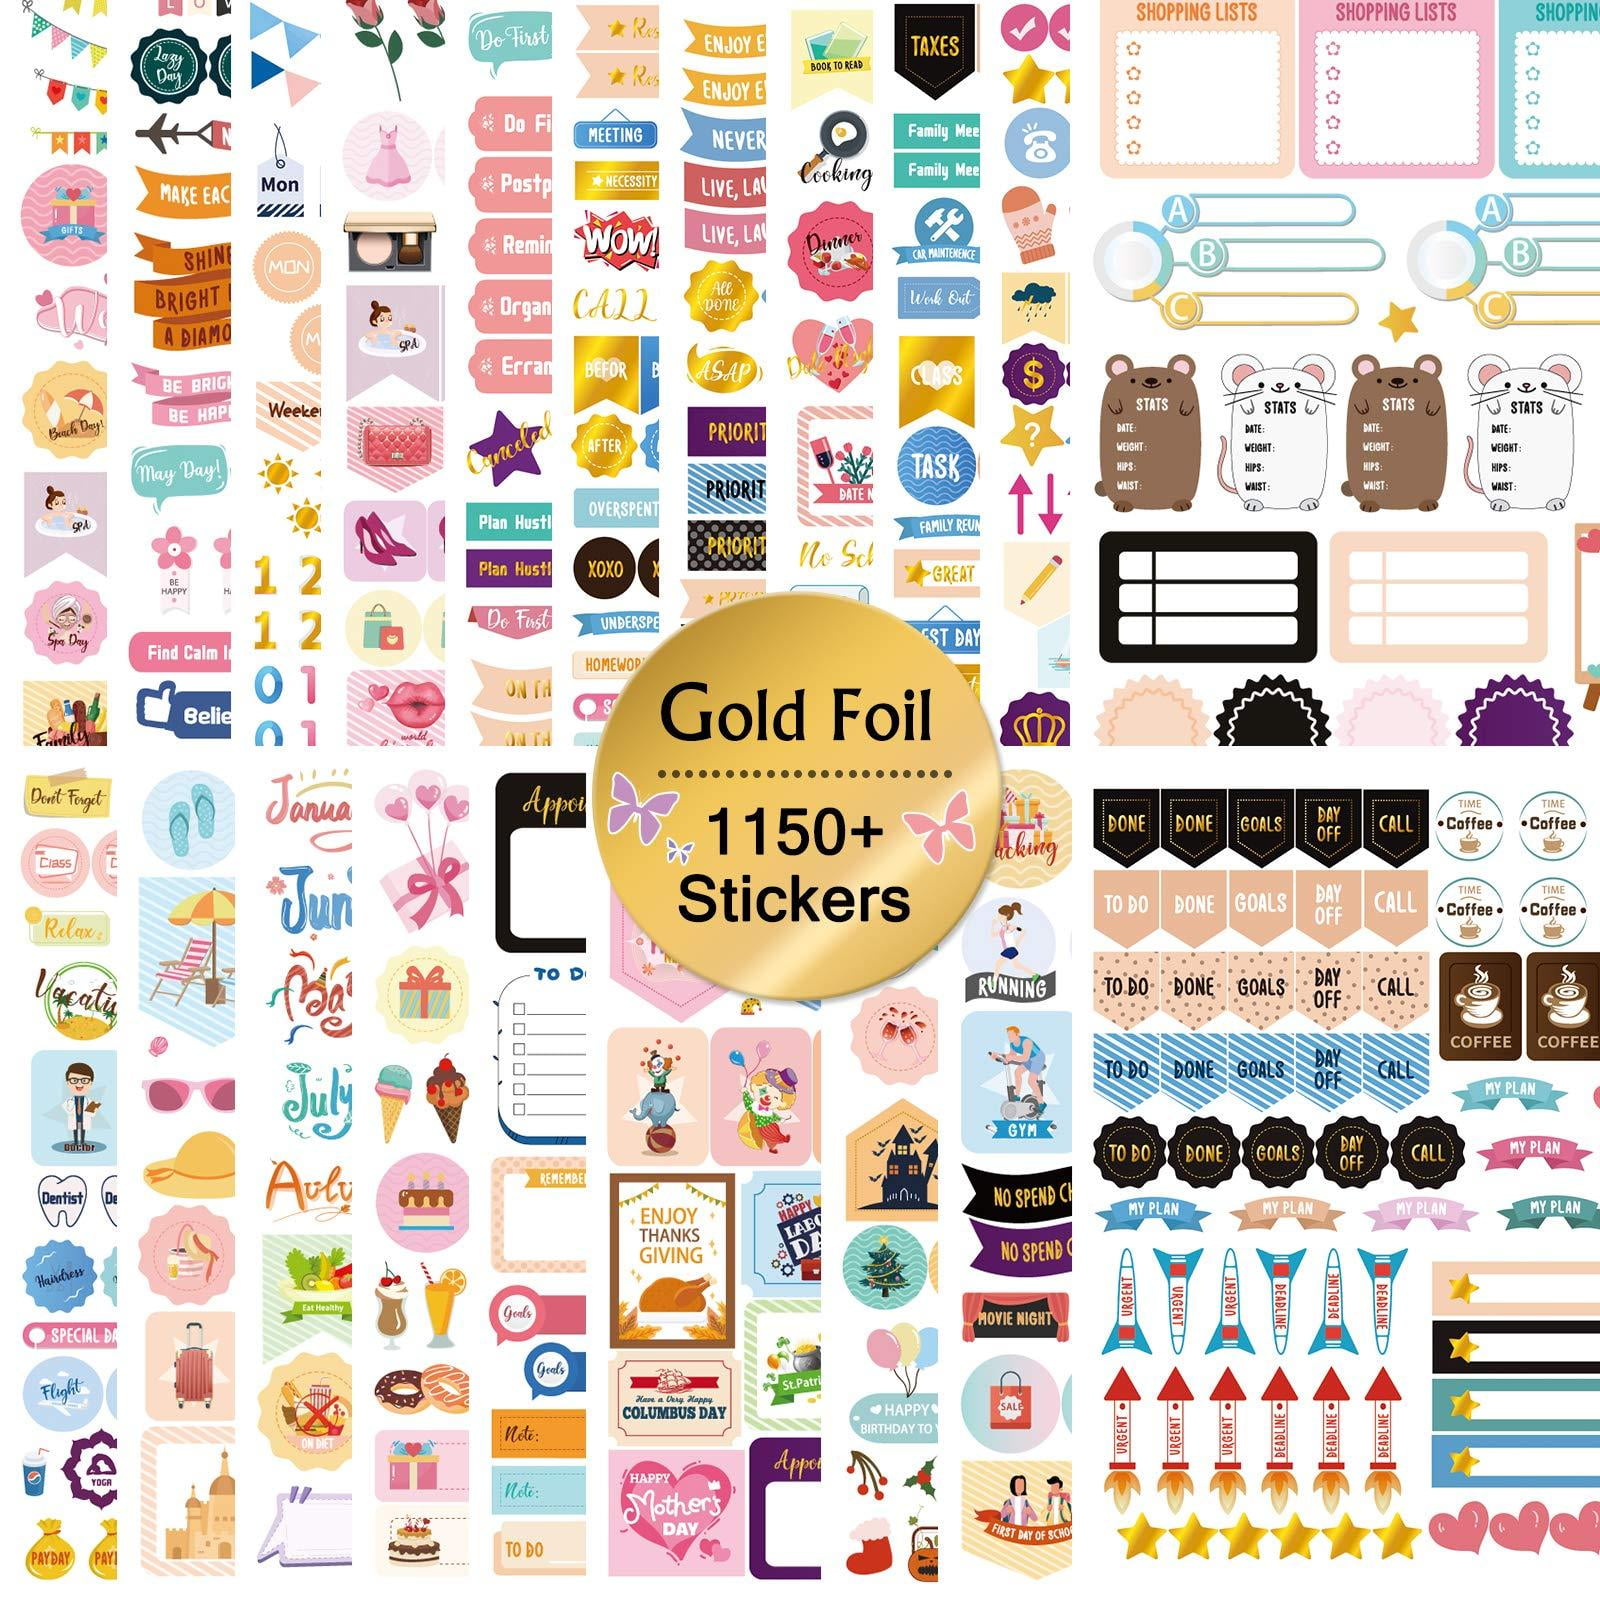 Steel Mill & Co Assorted 1000+ Budget Stickers, 24 Sheet Sticker Pack with Fun Stickers and Colored Dot Stickers, Cute Stickers for Monthly Planning